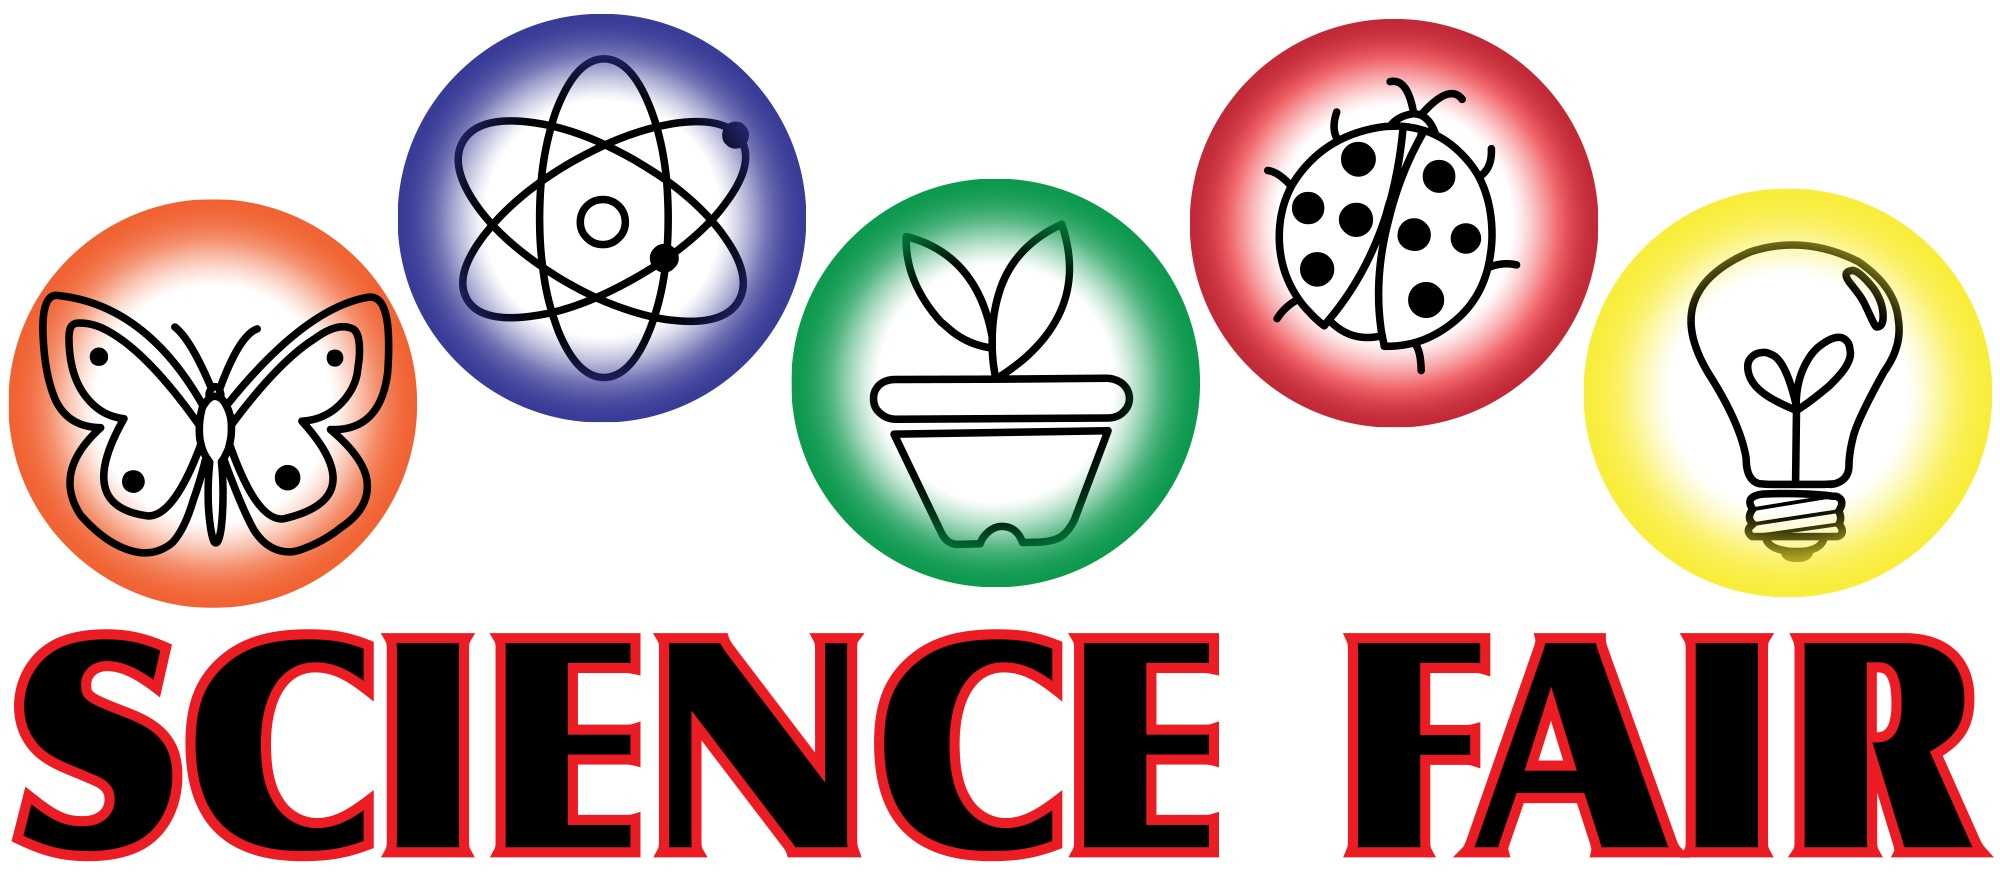 Science Fair With Regard To Science Fair Banner Template